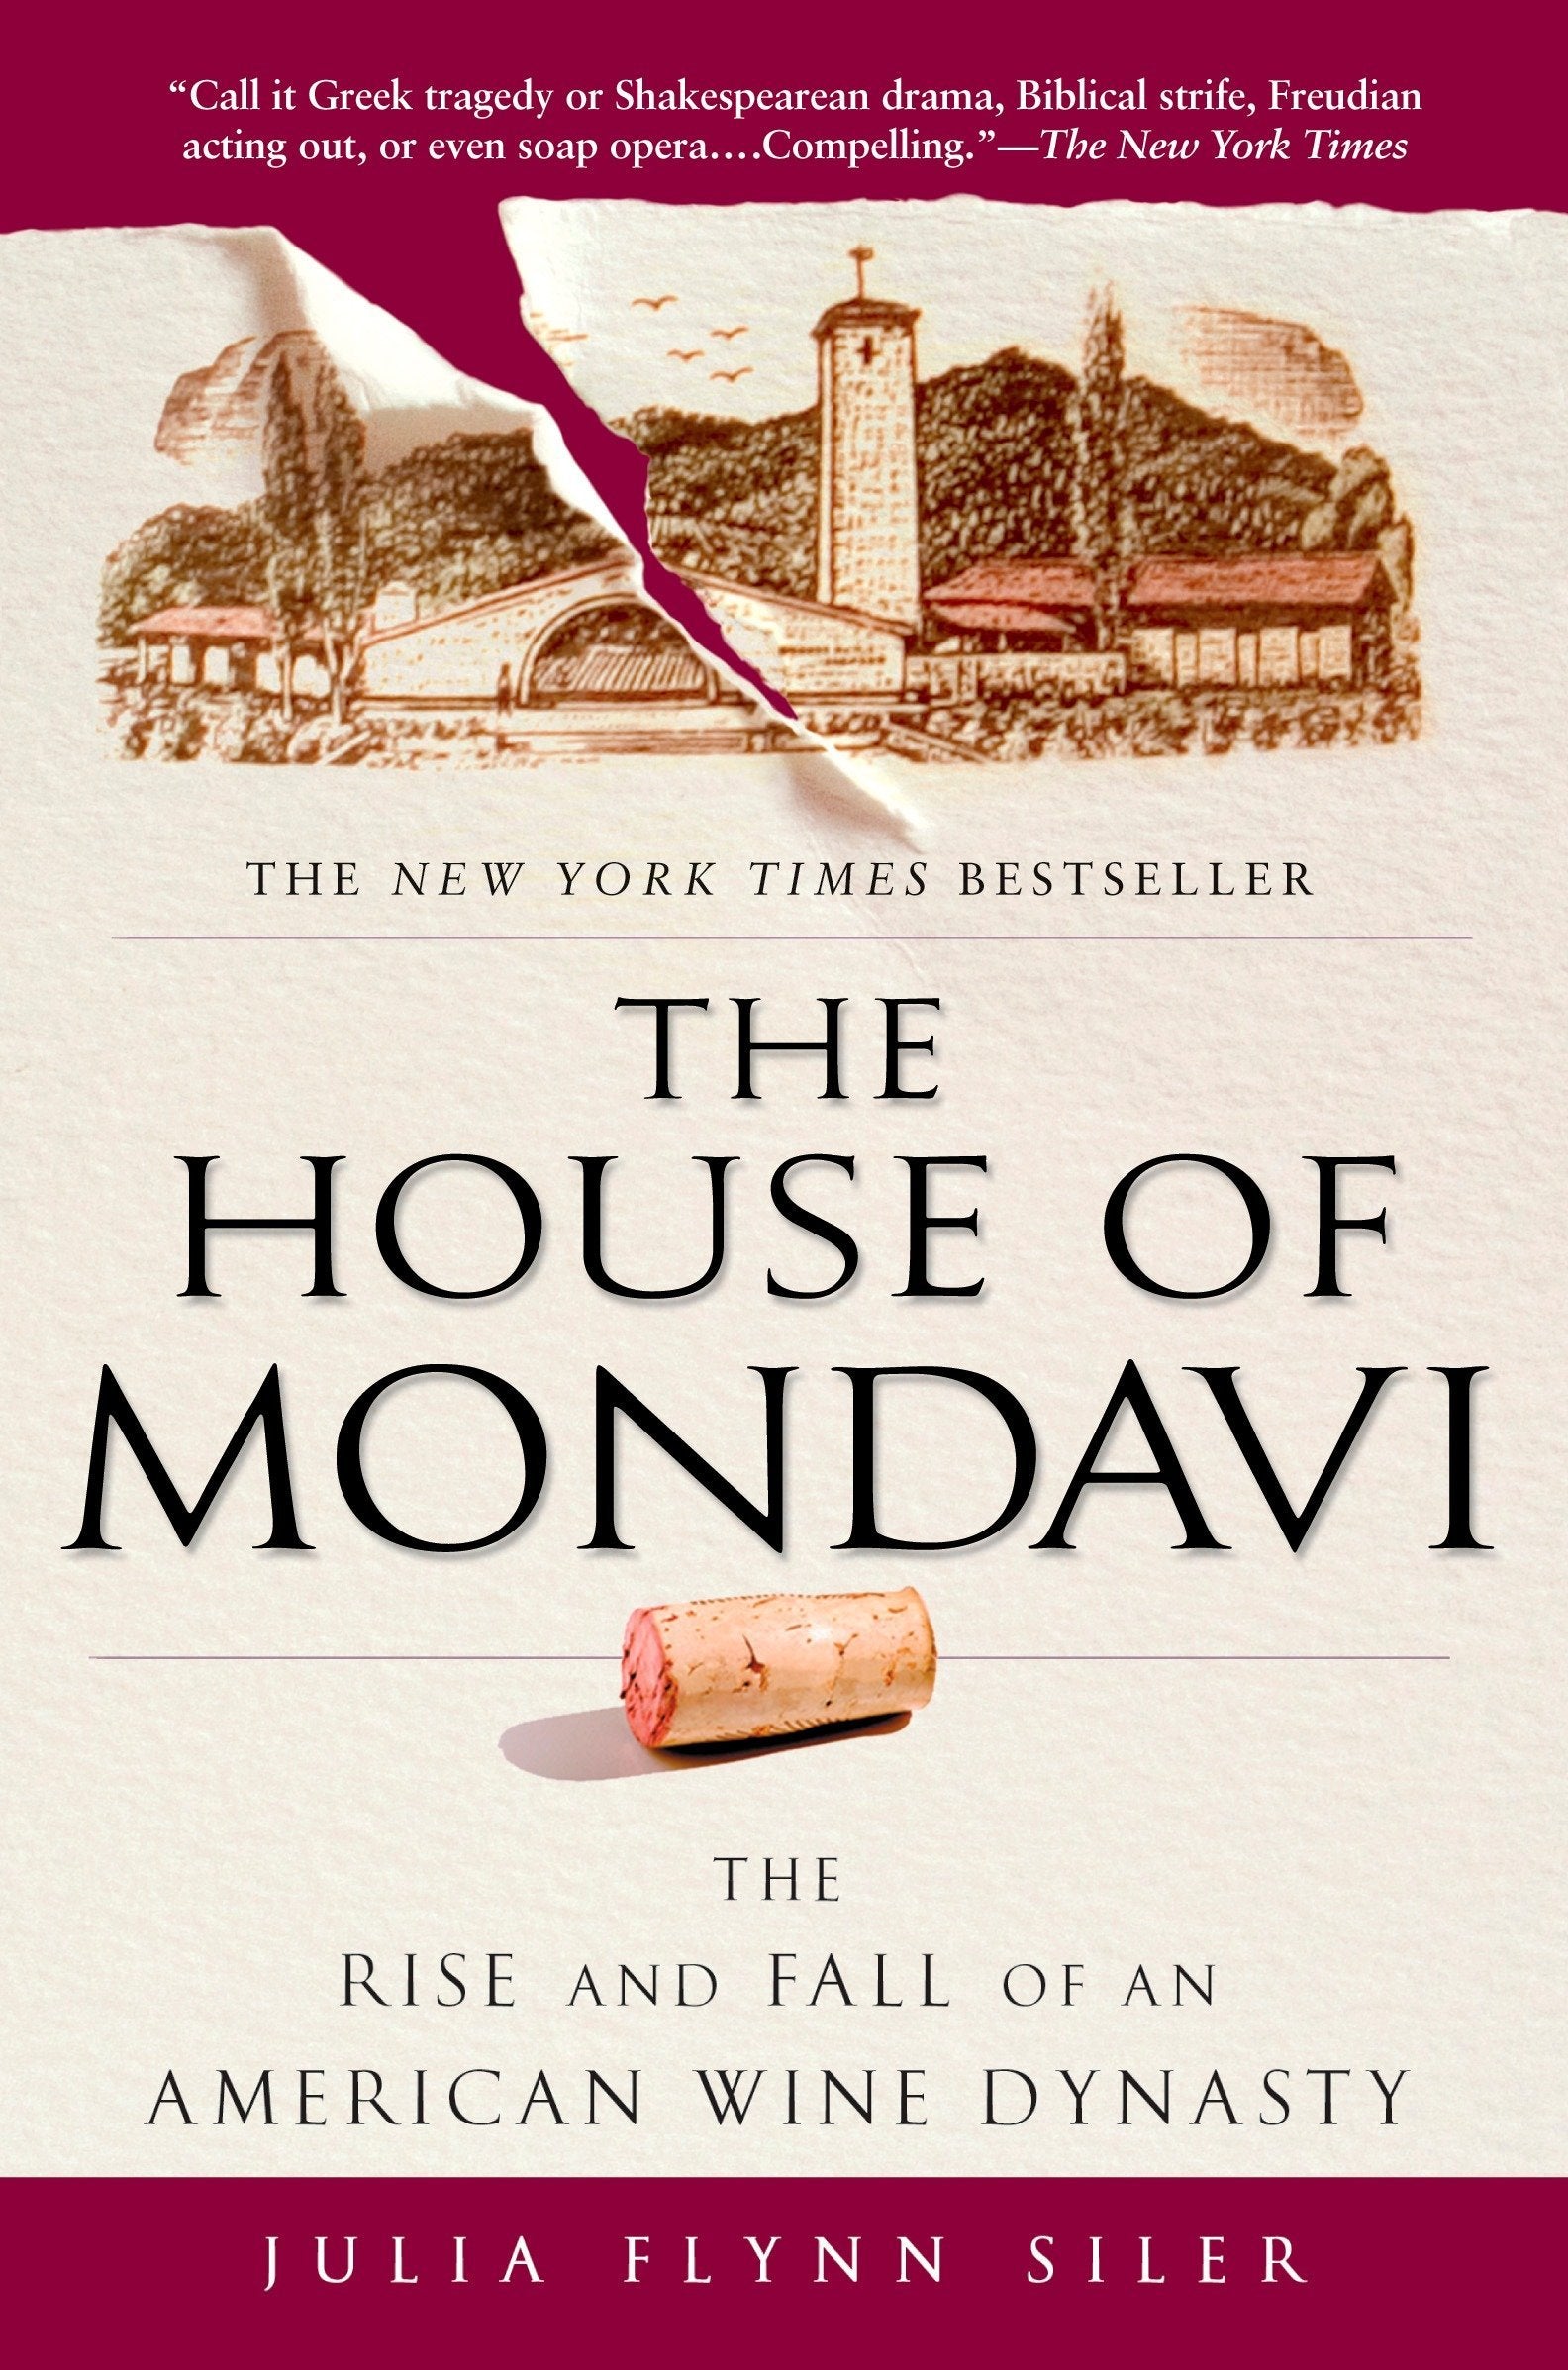 Livre ISBN 1592403670 The House of Mondavi: The Rise and Fall of an American Wine Dynasty (Julia Flynn Siler)